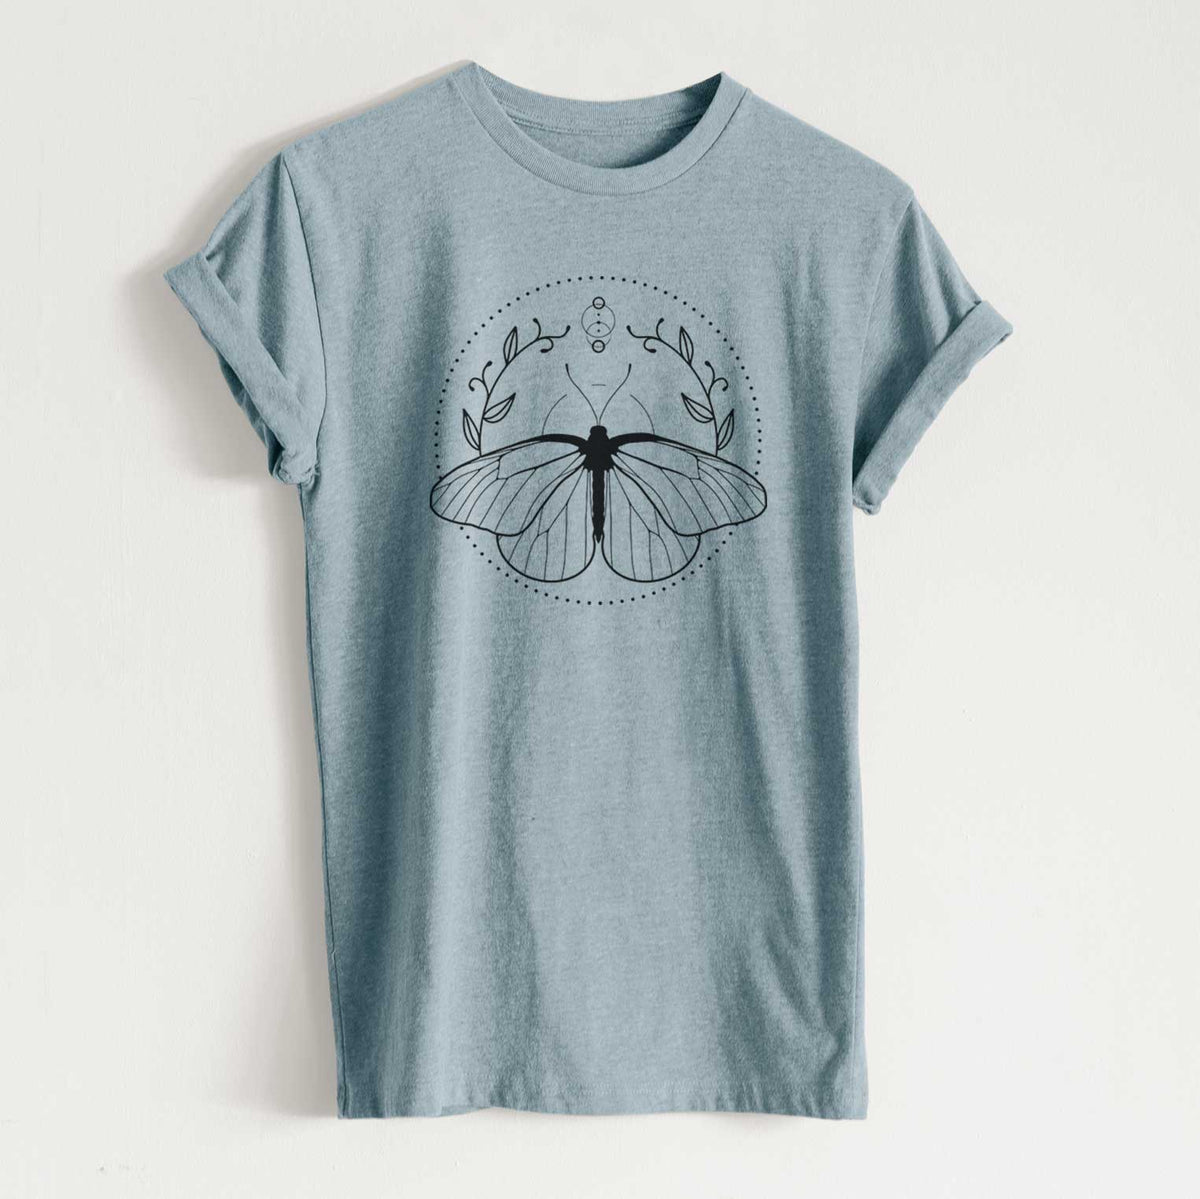 Aporia crataegi - Black Veined White Butterfly - Unisex Recycled Eco Tee  - CLOSEOUT - FINAL SALE